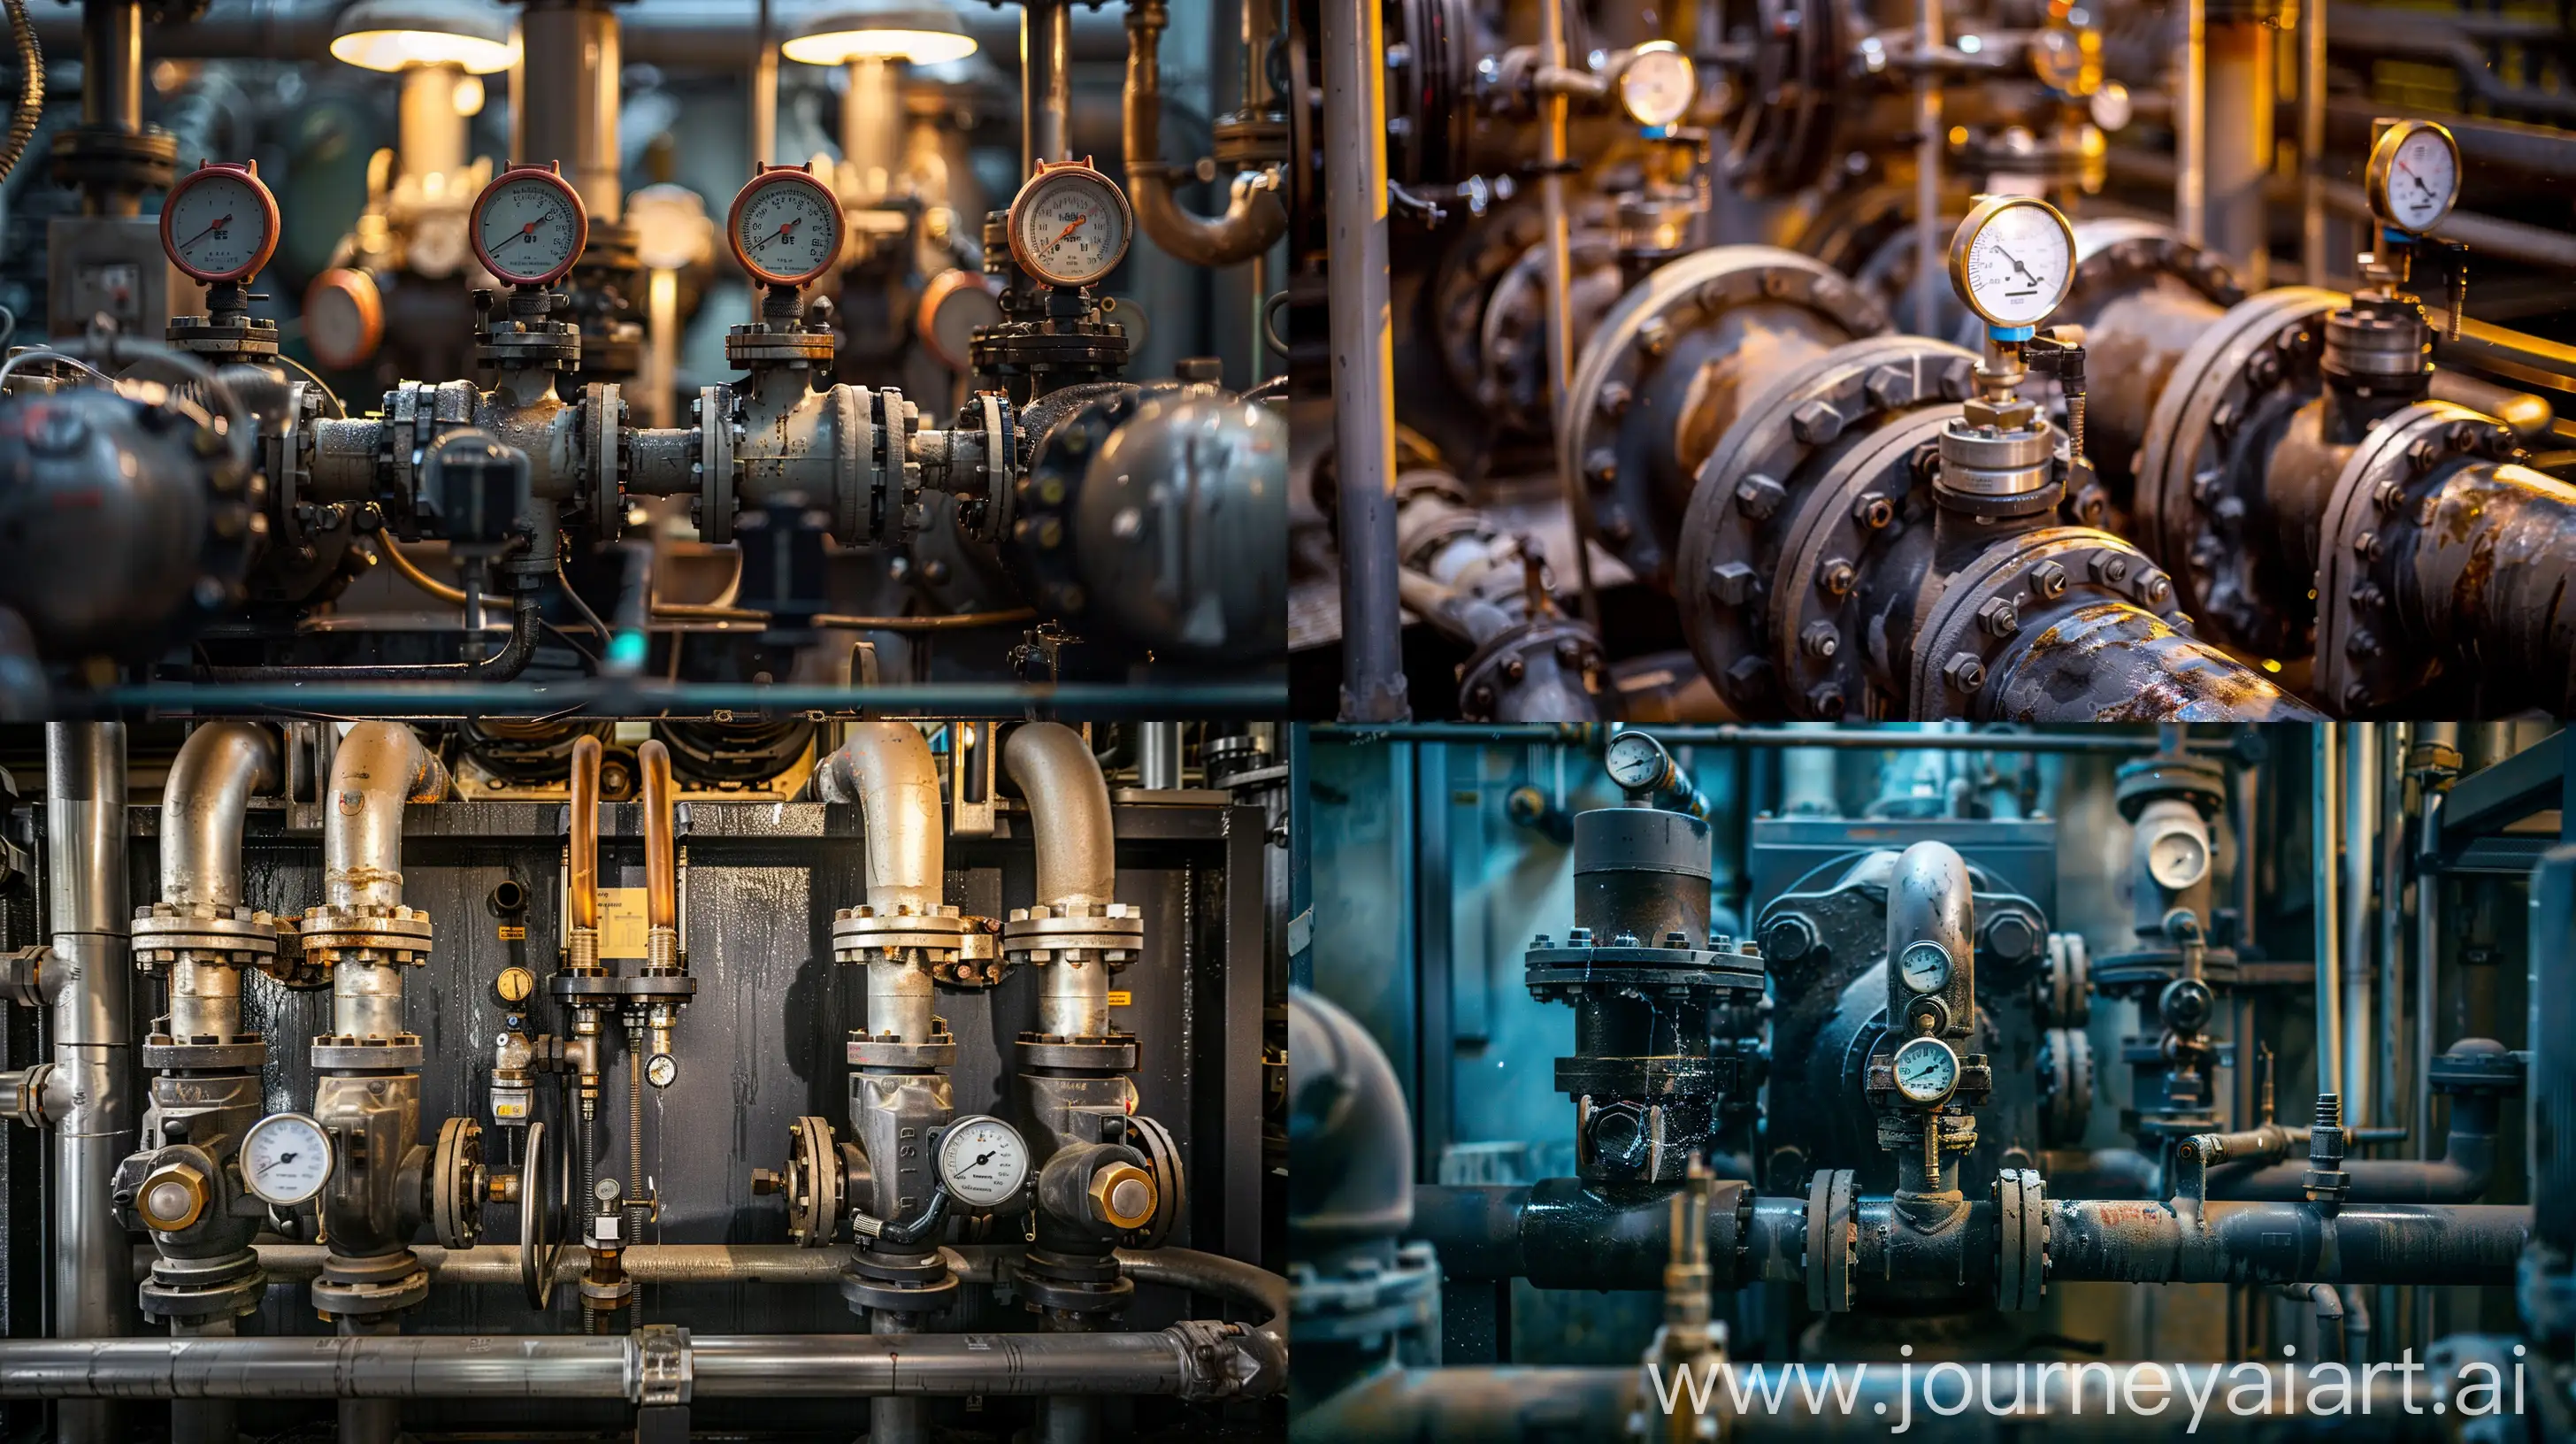 A close-up photograph capturing a pump station operating without a hydro-accumulator. The scene depicts the intricate workings of the pump system, with pipes, valves, and gauges arranged in an organized manner. The absence of a hydro-accumulator is evident, emphasizing the direct functionality of the pump station. The composition highlights the dynamic flow of water through the system, showcasing the pumps in action. The lighting is focused, illuminating key components and creating contrast to enhance visibility. The surroundings suggest an industrial environment, with metal surfaces and technical equipment contributing to the atmosphere. The photo conveys the efficiency and functionality of a pump station operating without a hydro-accumulator, presenting an opportunity for technical analysis and discussion.  --ar 16:9 